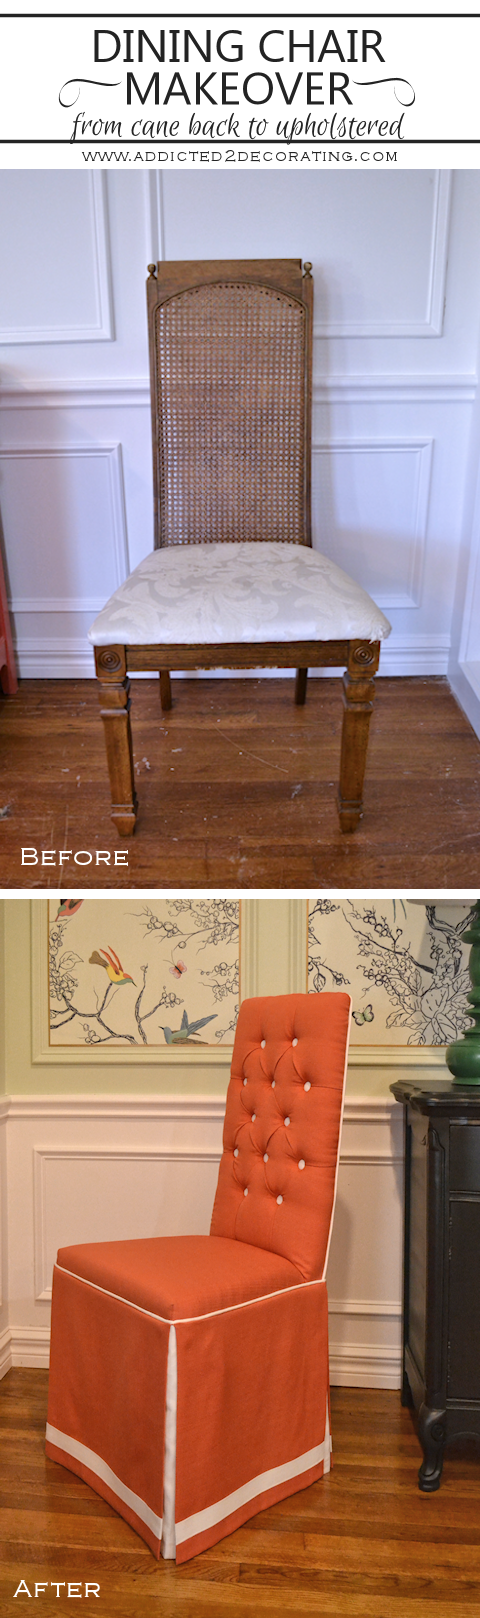 dining chair makeover - before and after - from cane back to fully upholstered with tufted back and skirt